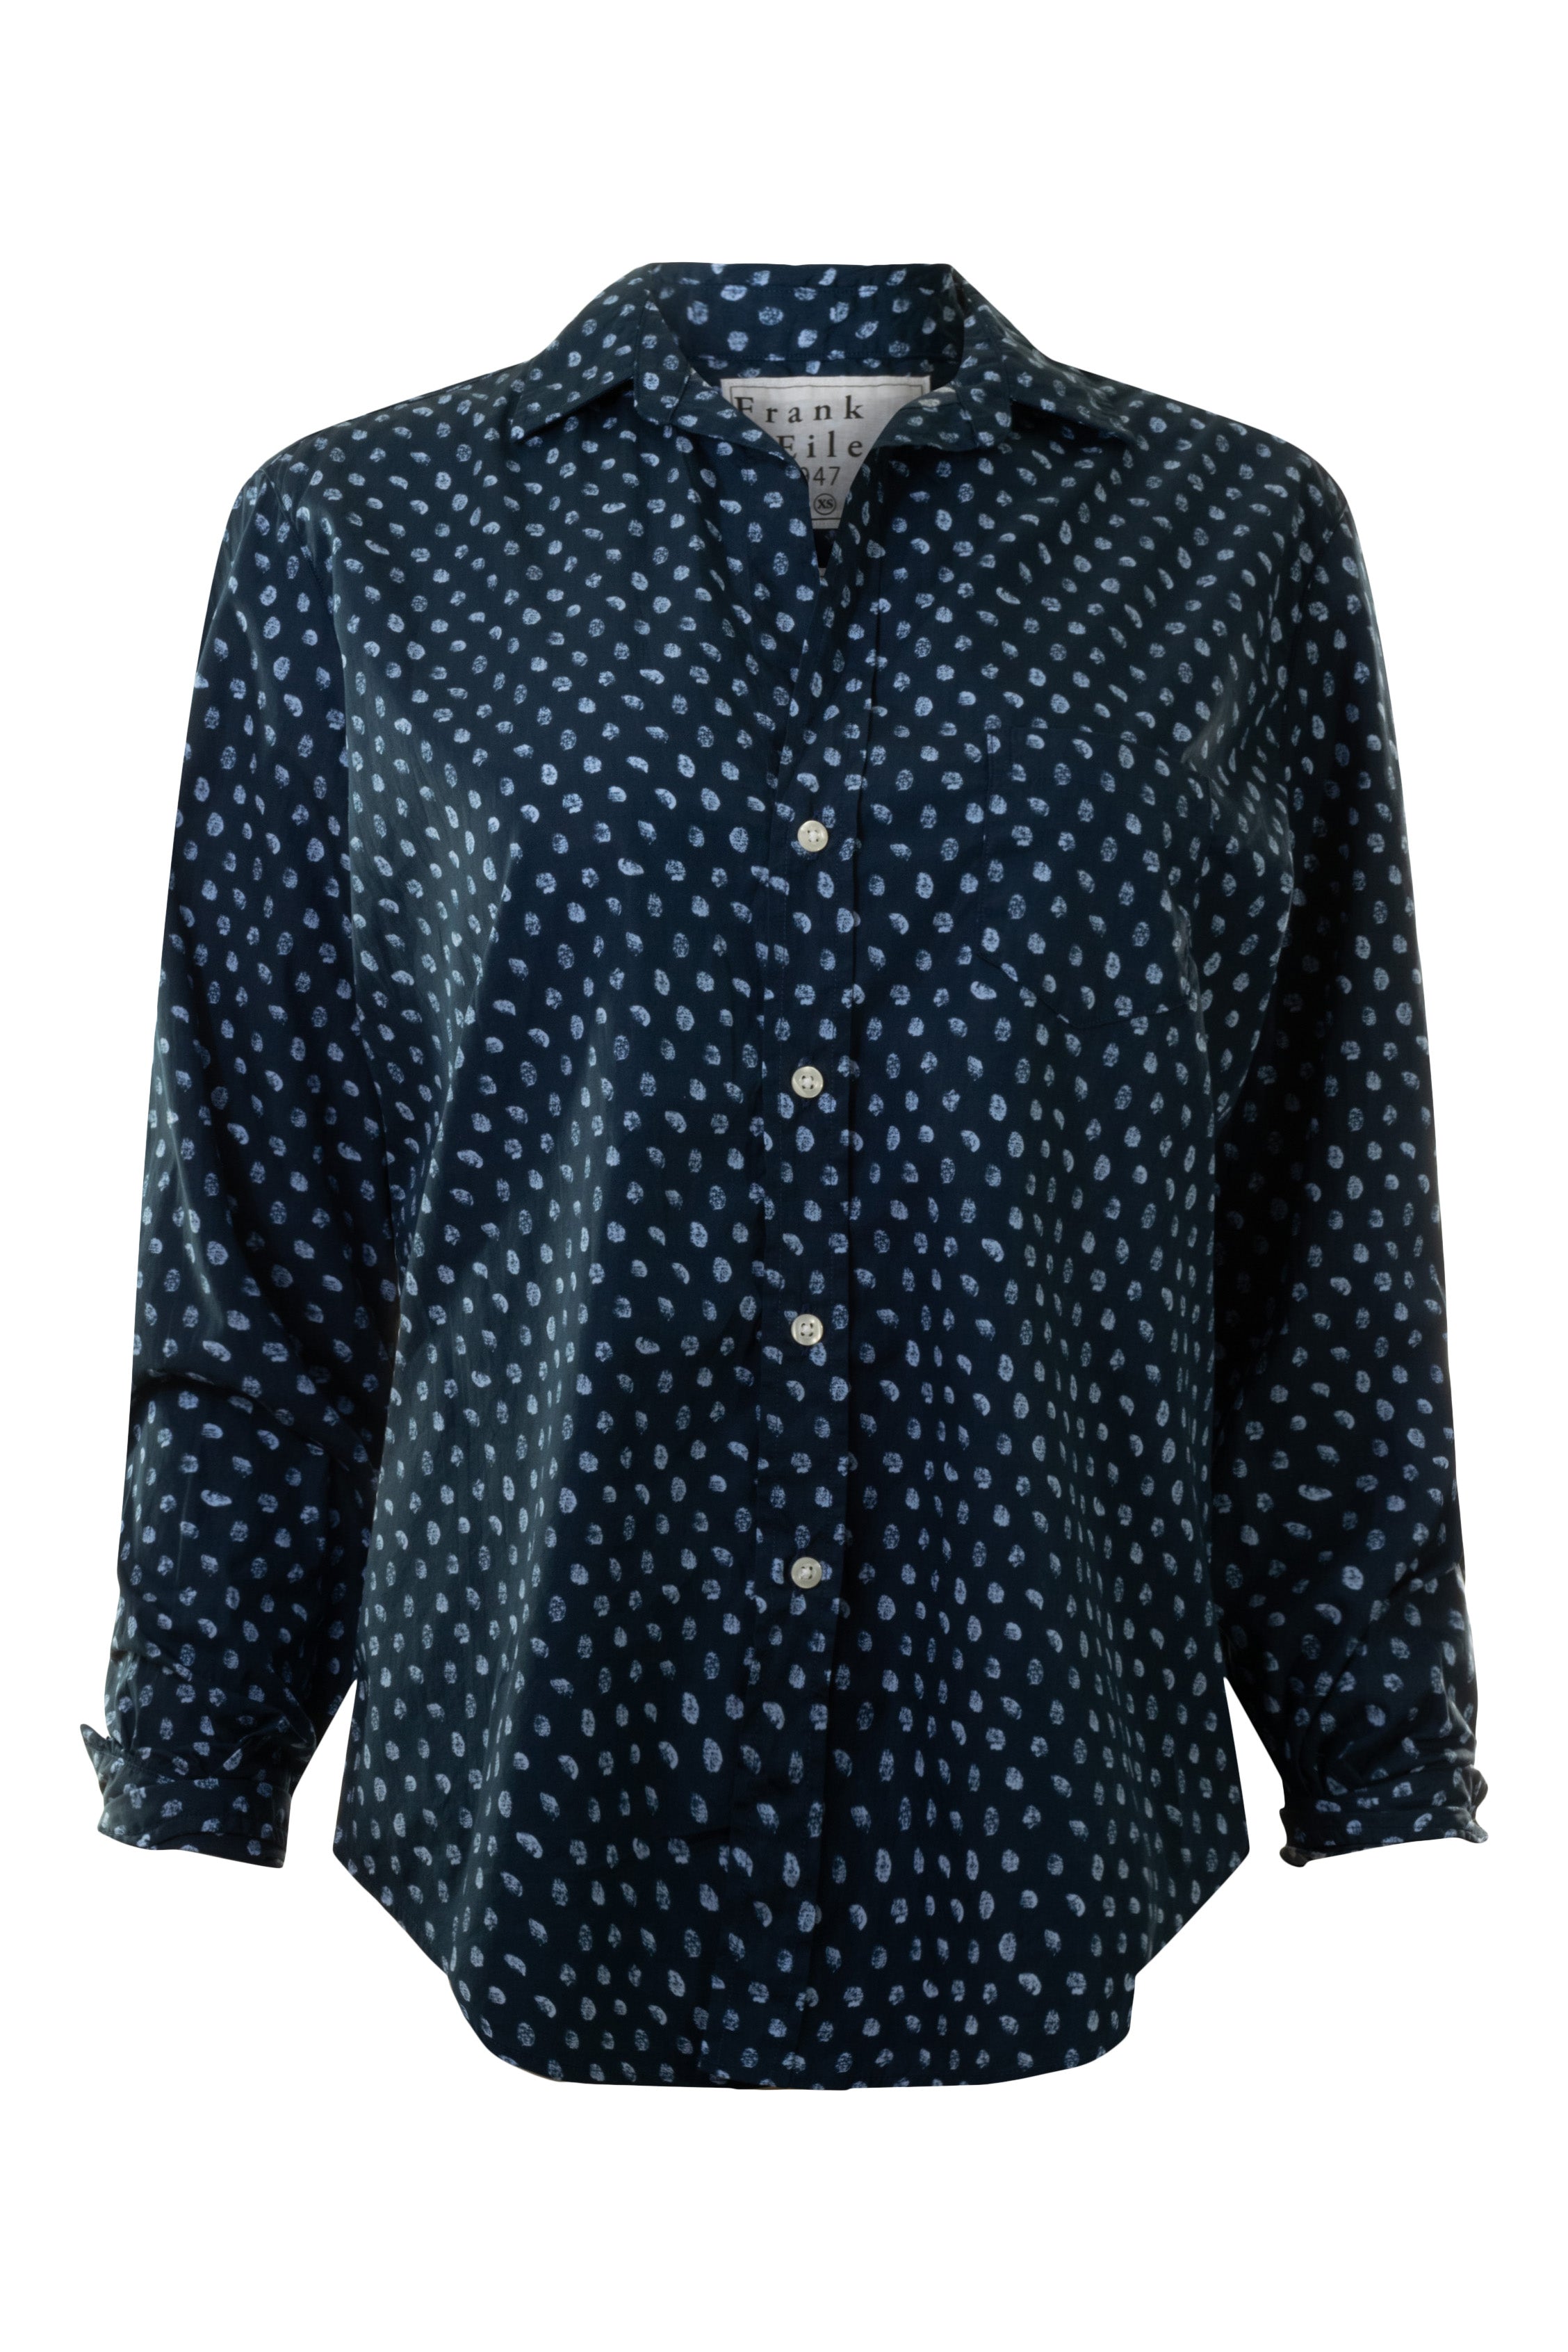 Frank & Eileen Eileen Relaxed Button Up Shirt in Messy Navy with Blue Dots